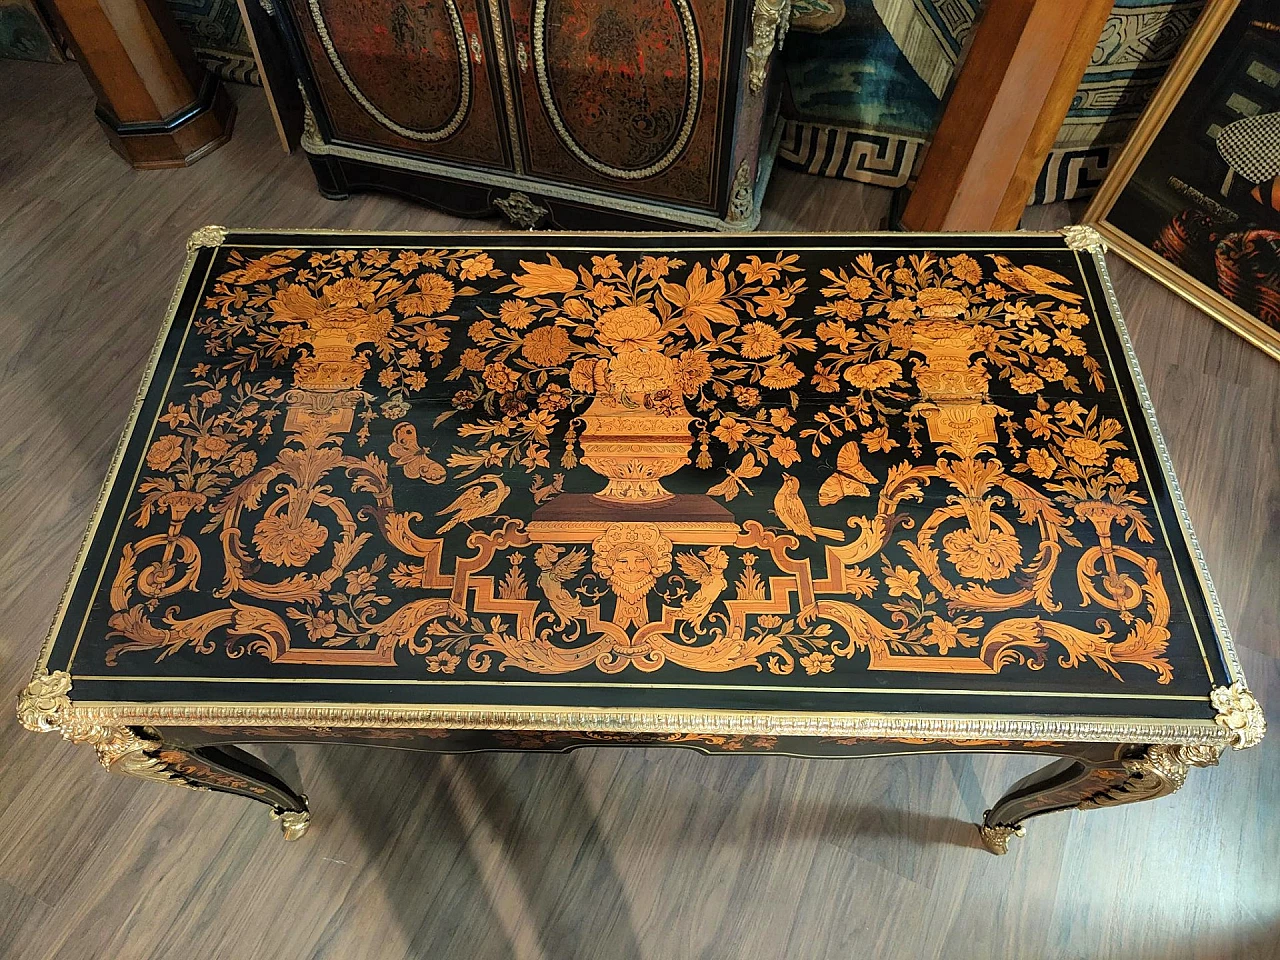 Inlaid desk with floral and animals depictions and applications in gilded bronze, 19th century 8